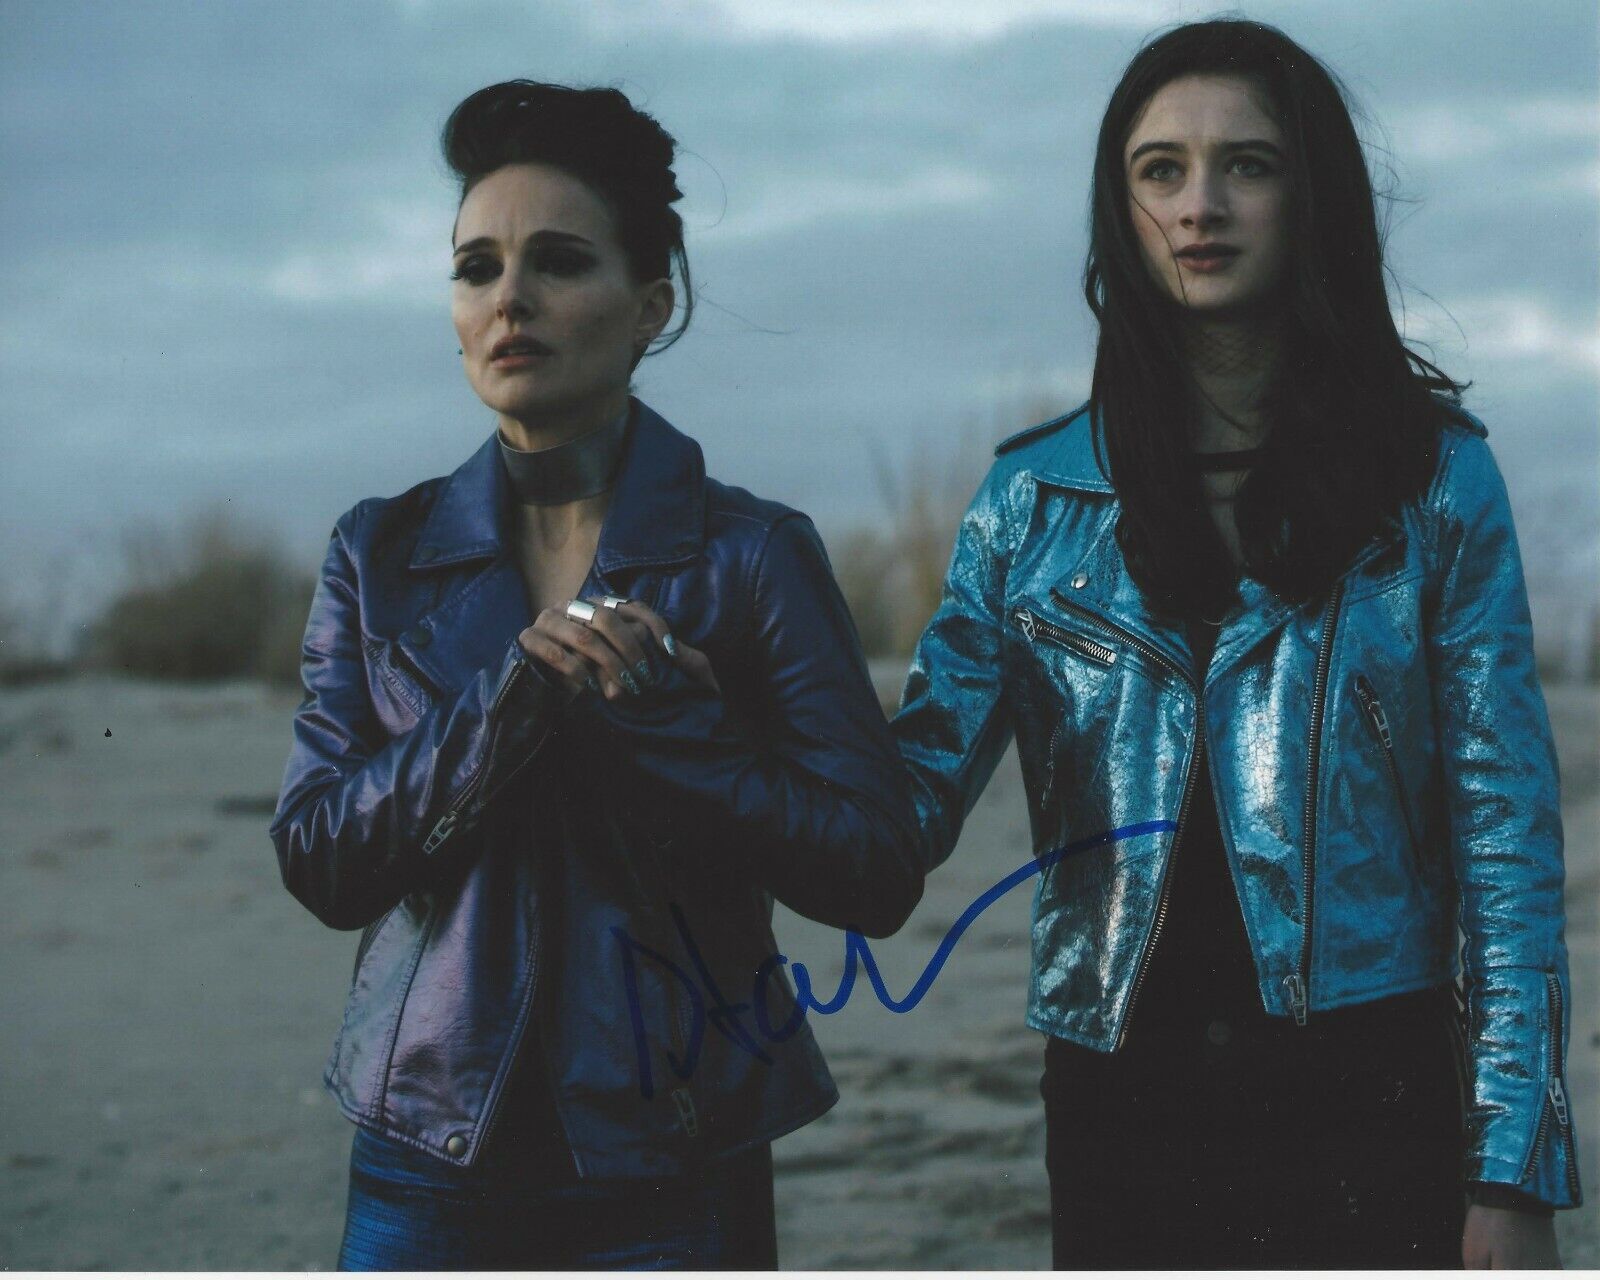 ACTRESS STACY MARTIN SIGNED 'VOX LUX' 8x10 MOVIE Photo Poster painting w/COA NYMPHOMANIAC